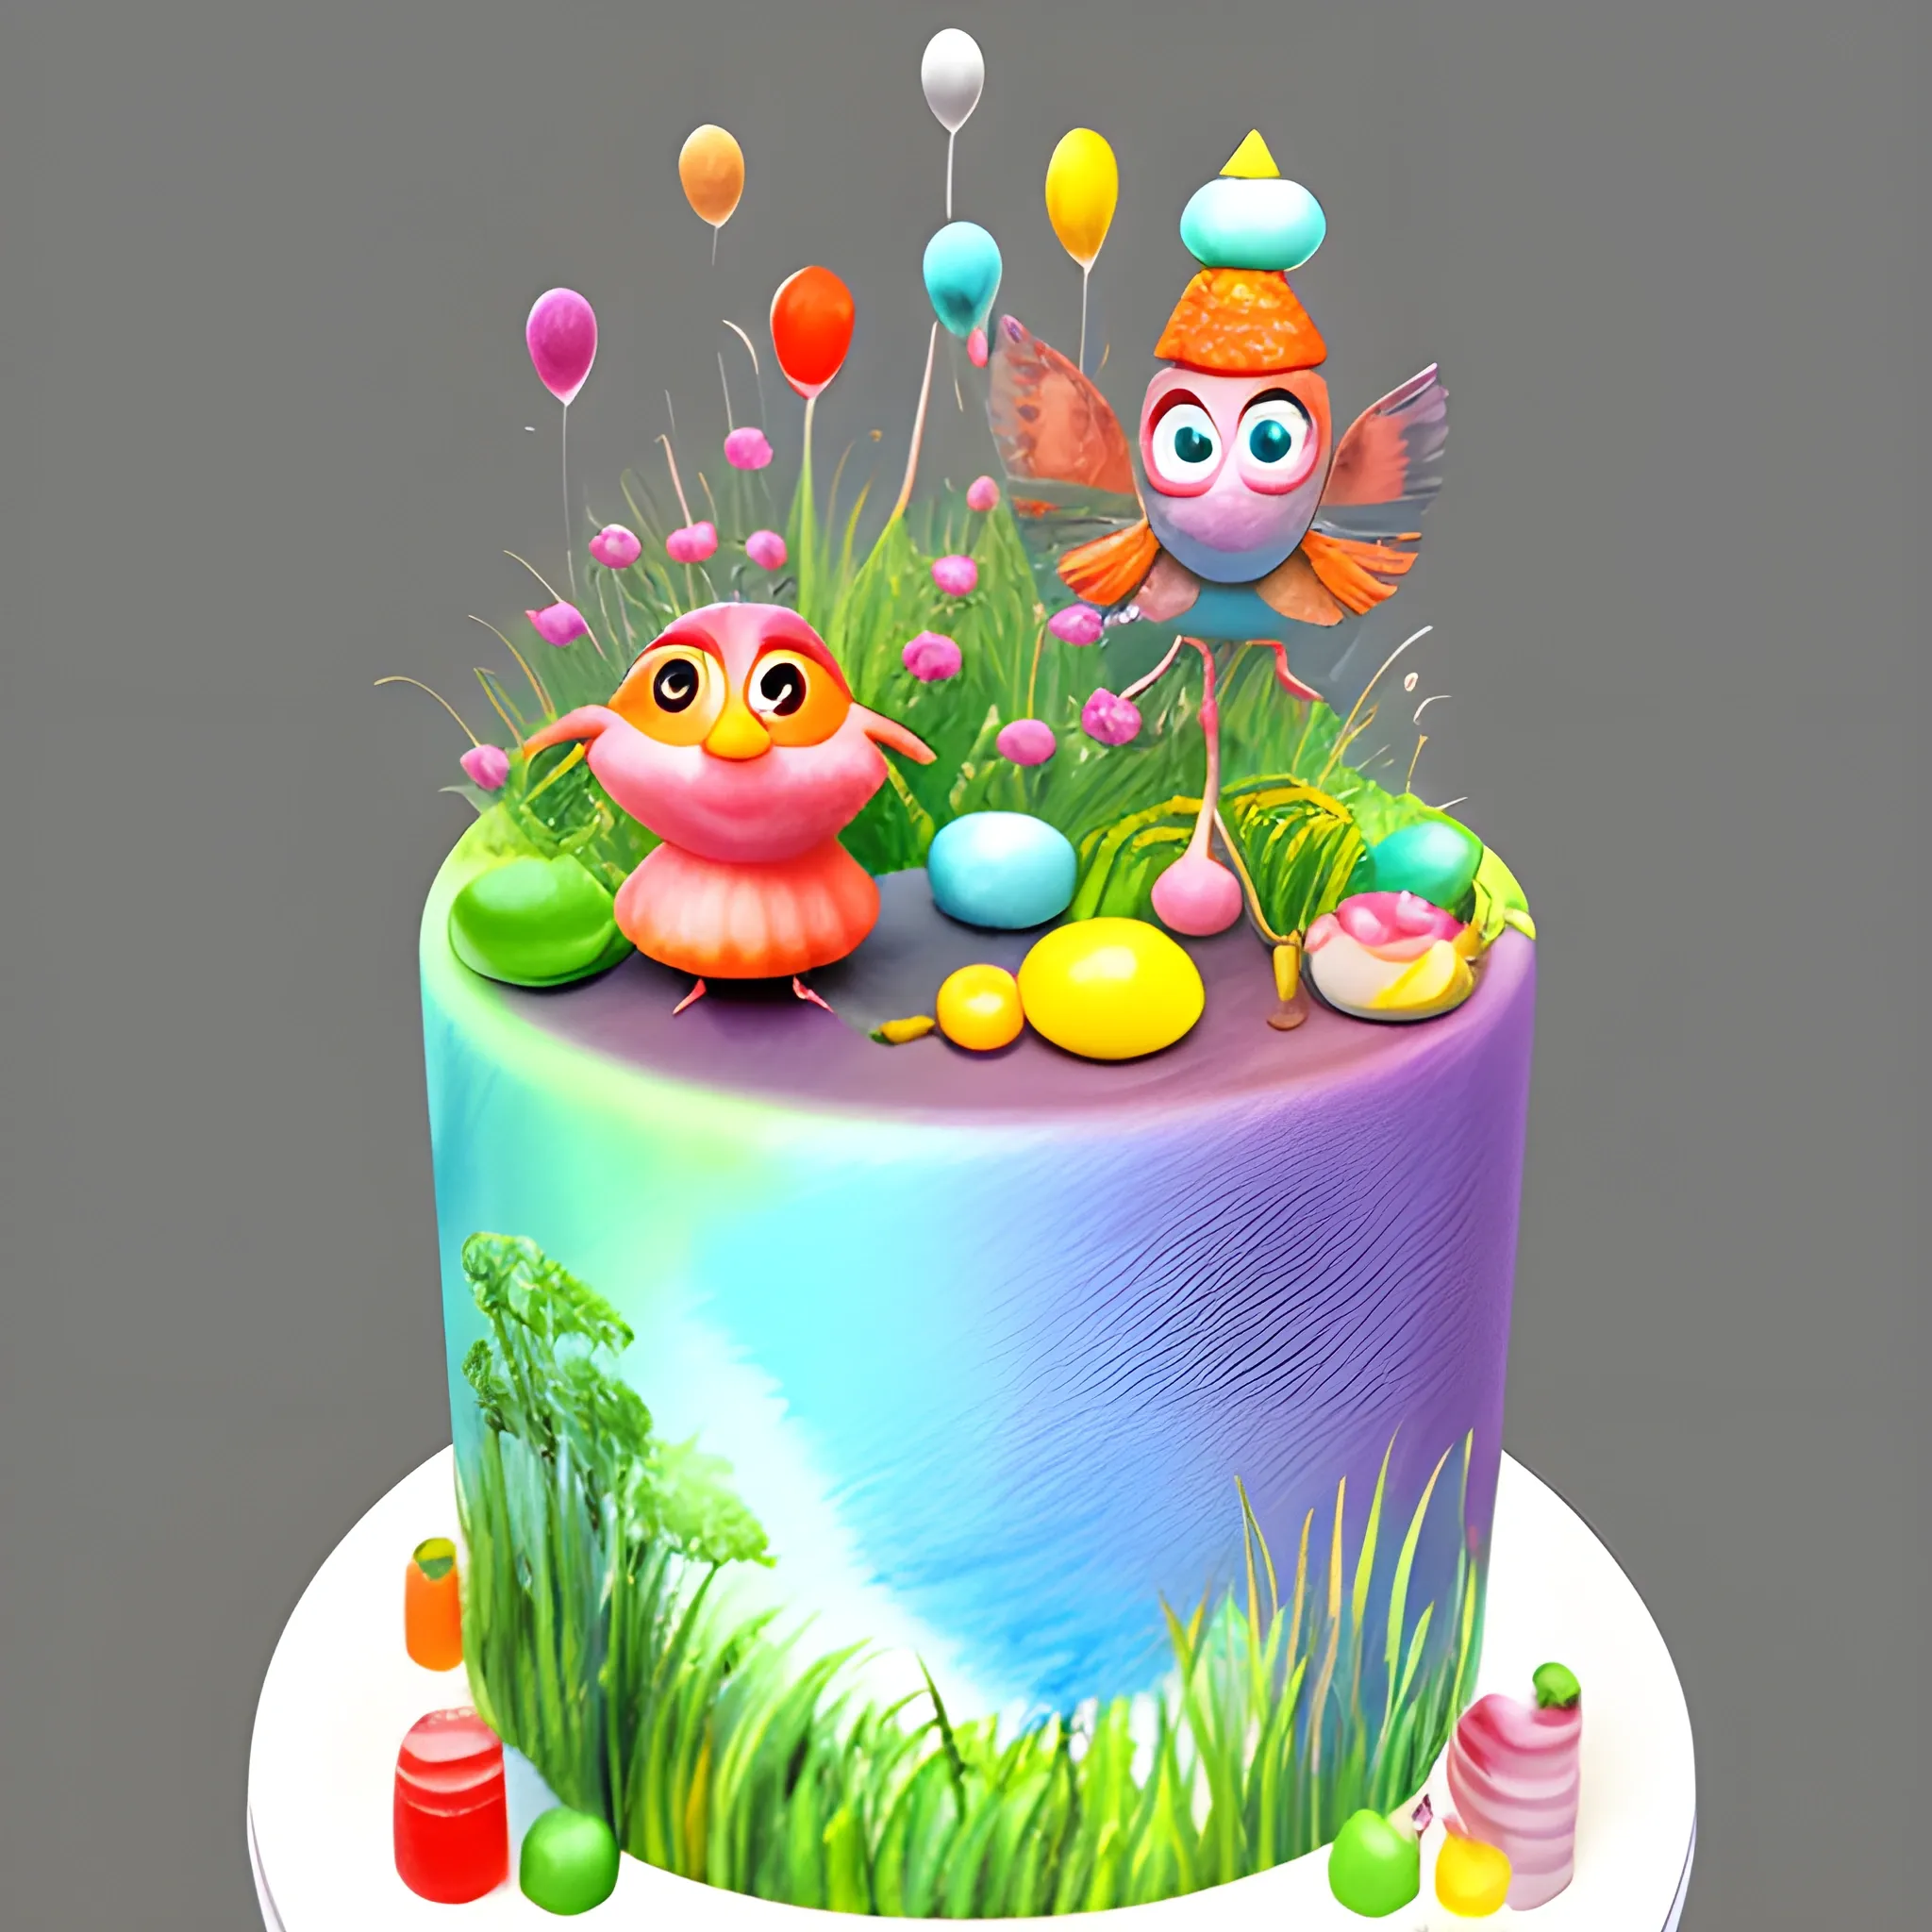 3D, Water Color, kwaii, pixar style,  cockies, ice creams, cakes,  candys, colorful, full of flavours 